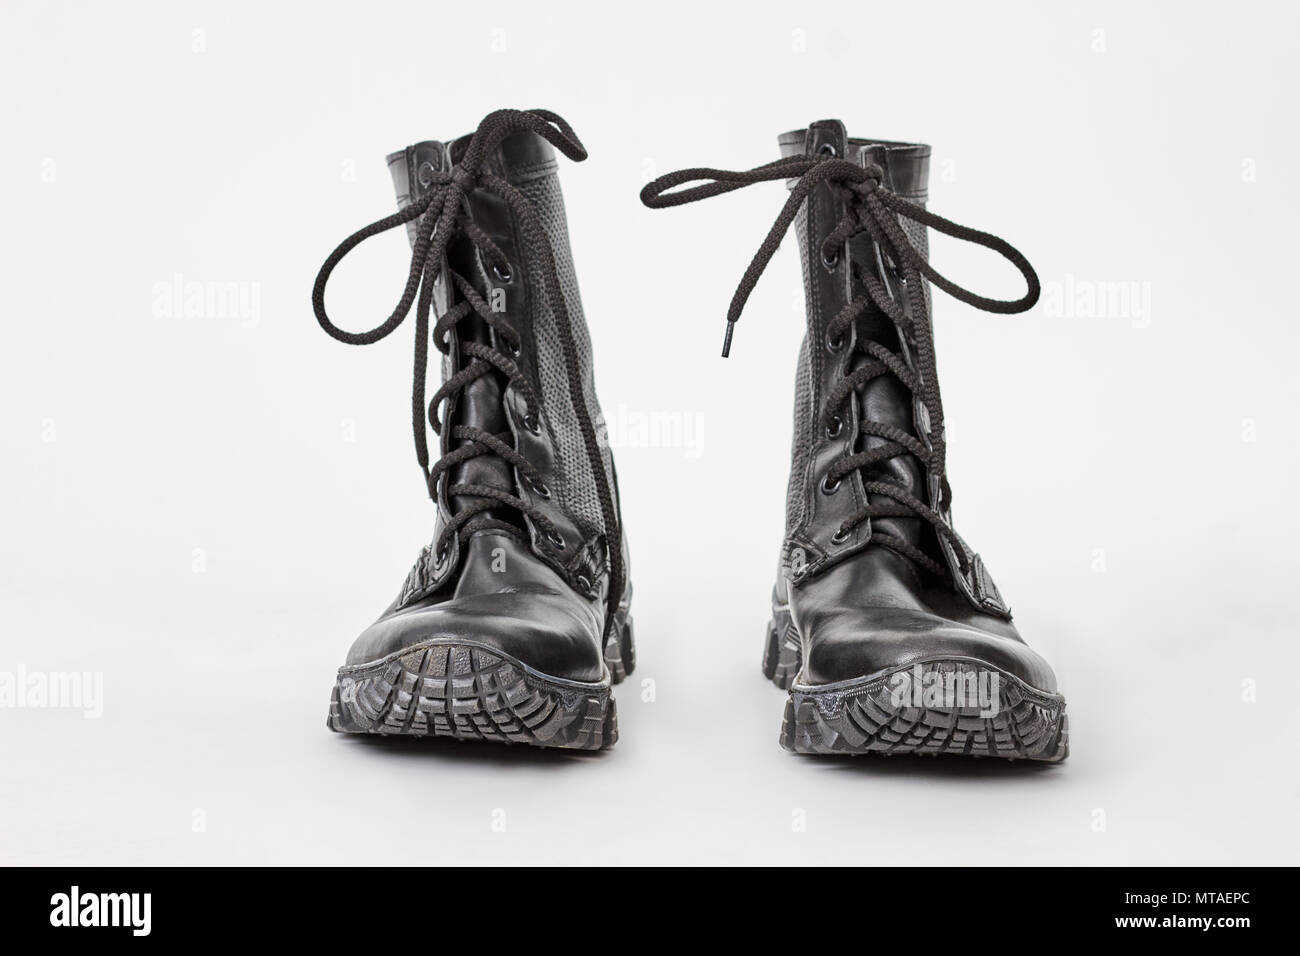 black military style boots